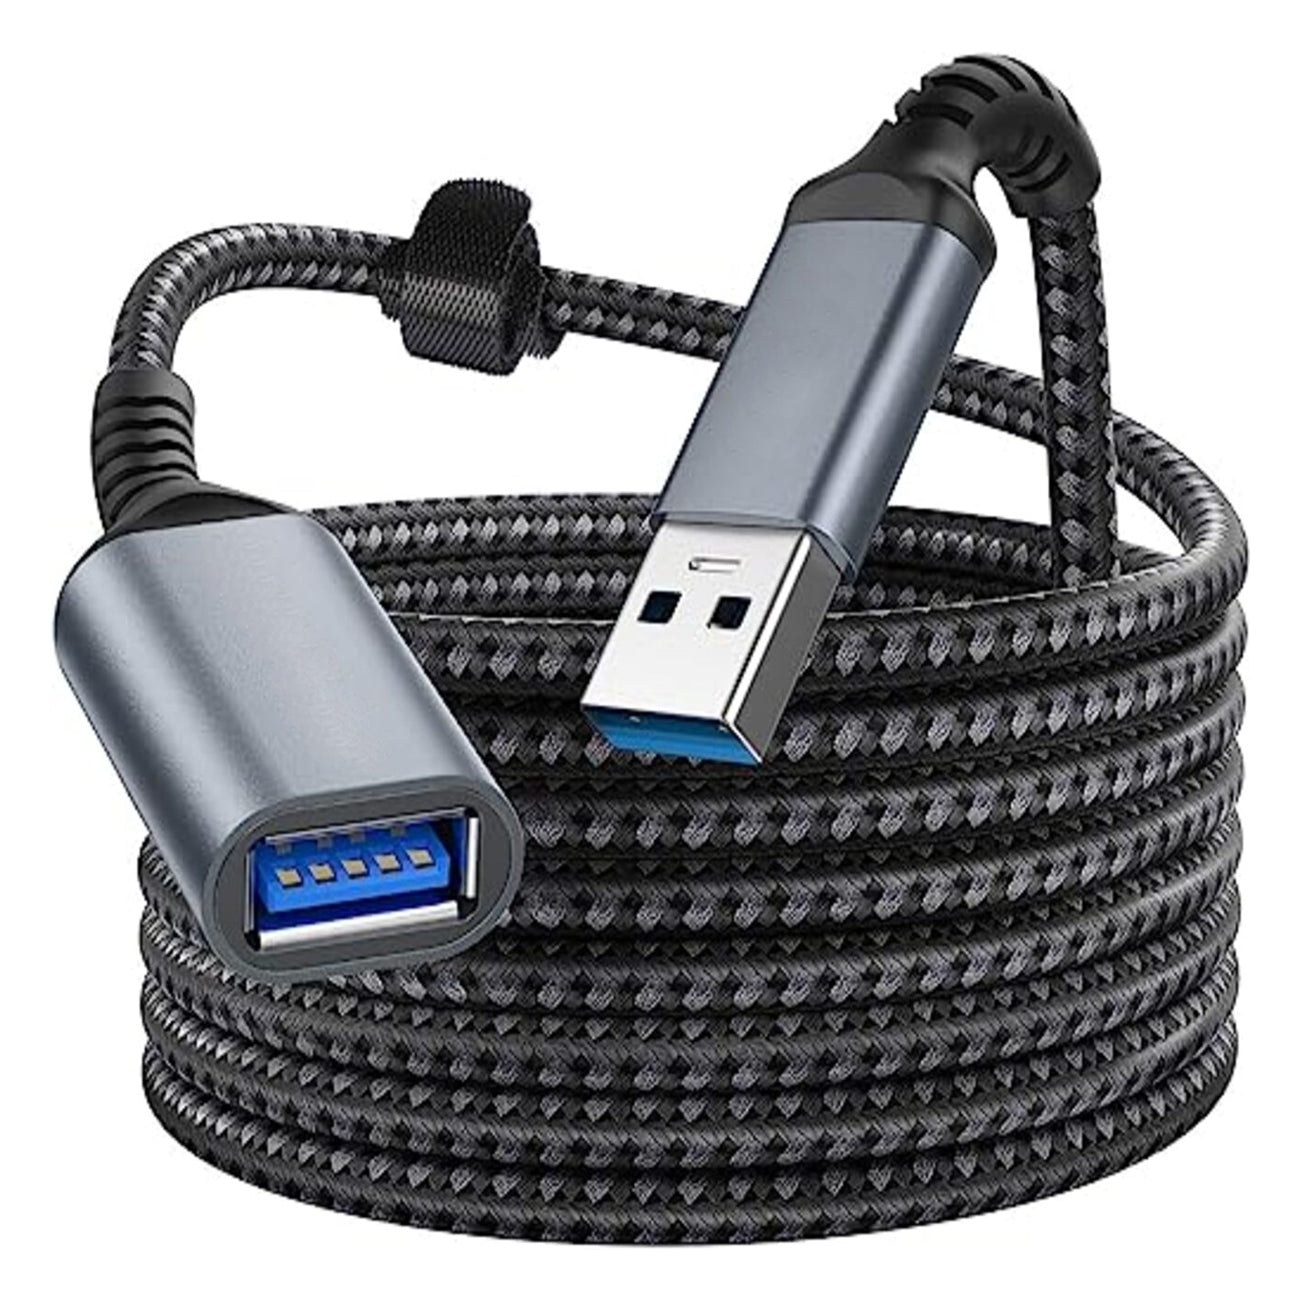 10FT USB Extension Cable USB 3.0